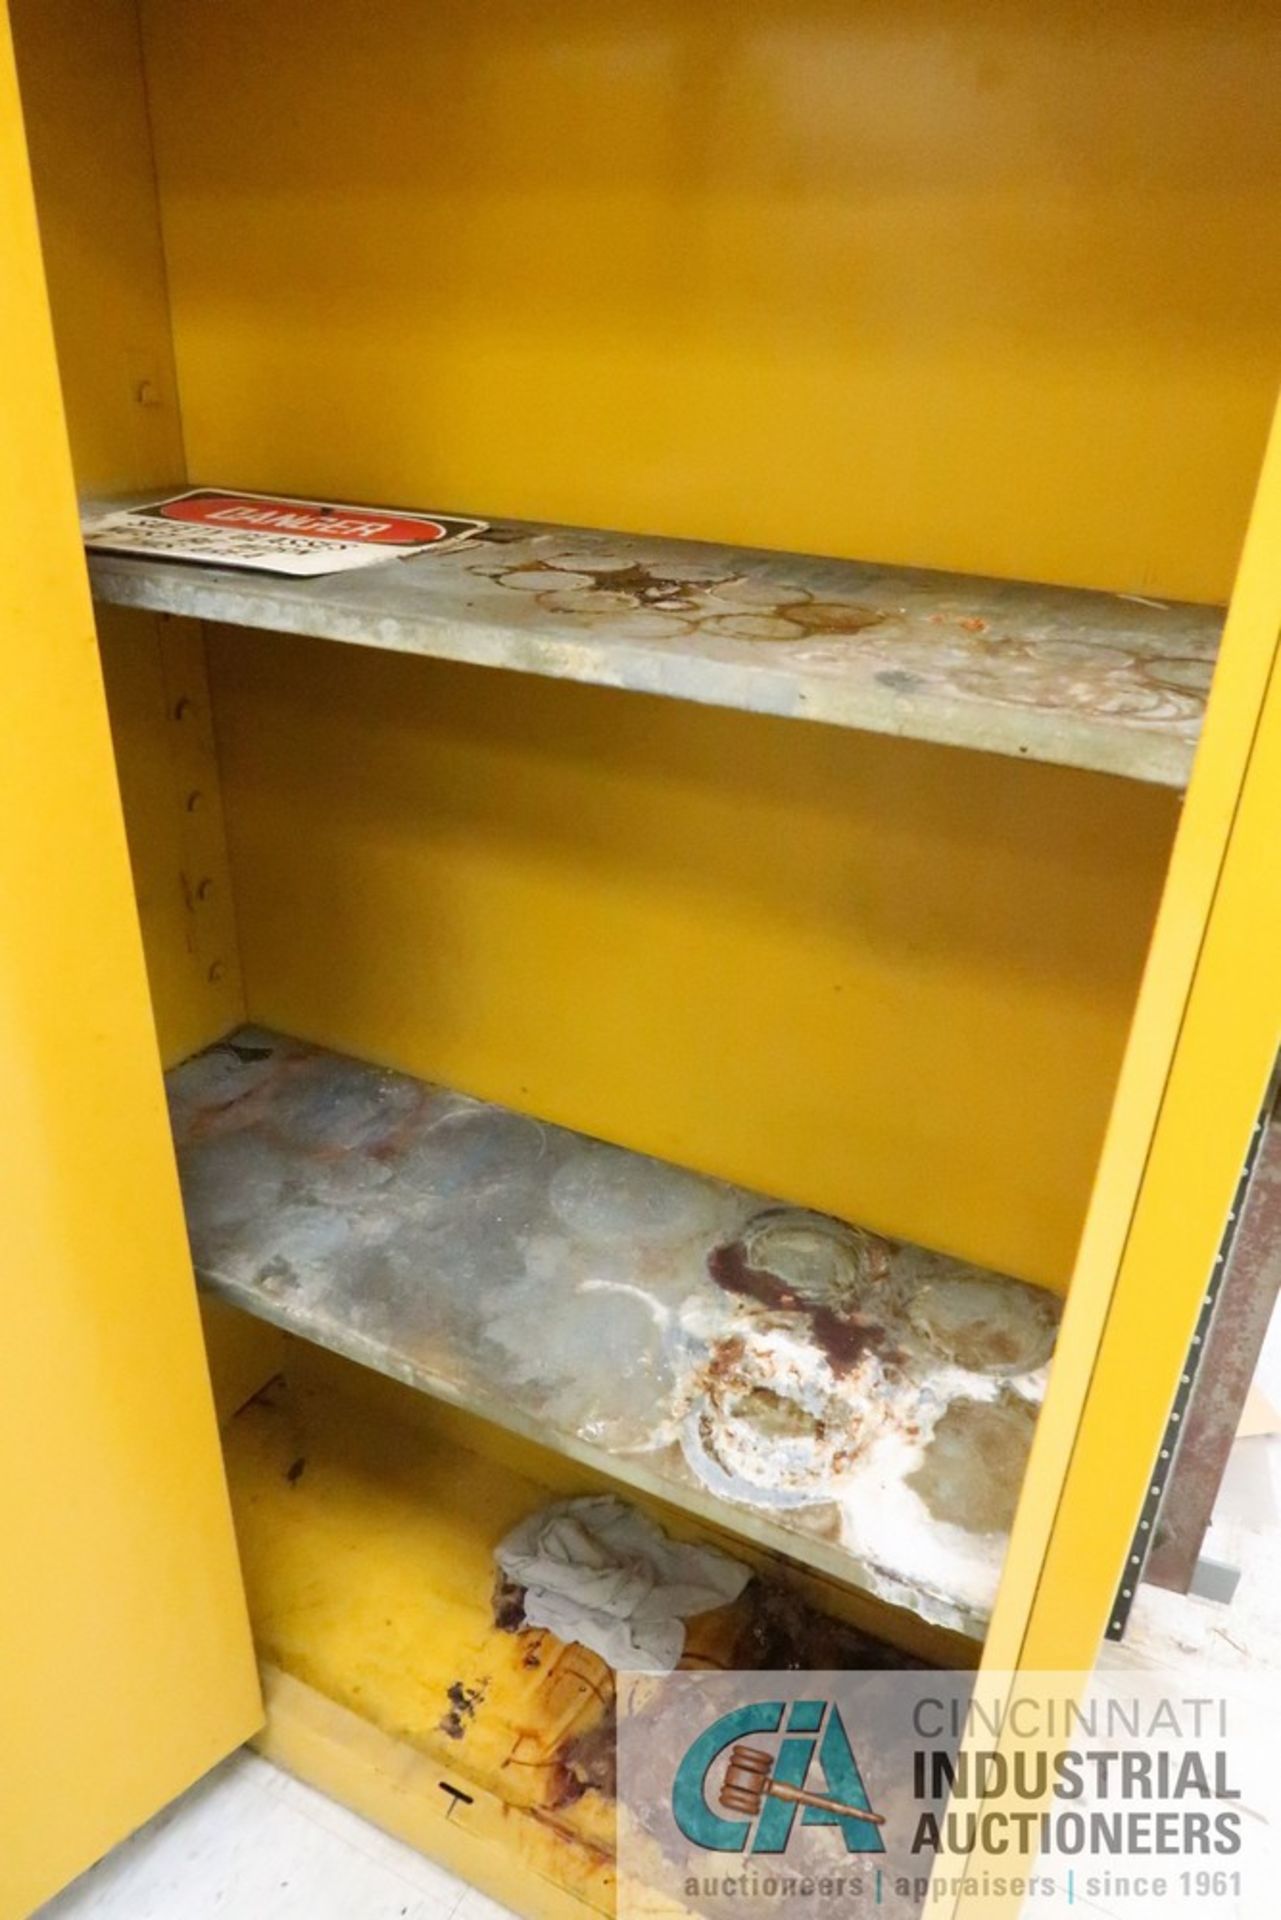 45 GALLON EAGLE MODEL 1945 FLAMMABLE STORAGE CABINET (ROOM 2283B) - Located on 2nd floor - Image 3 of 3